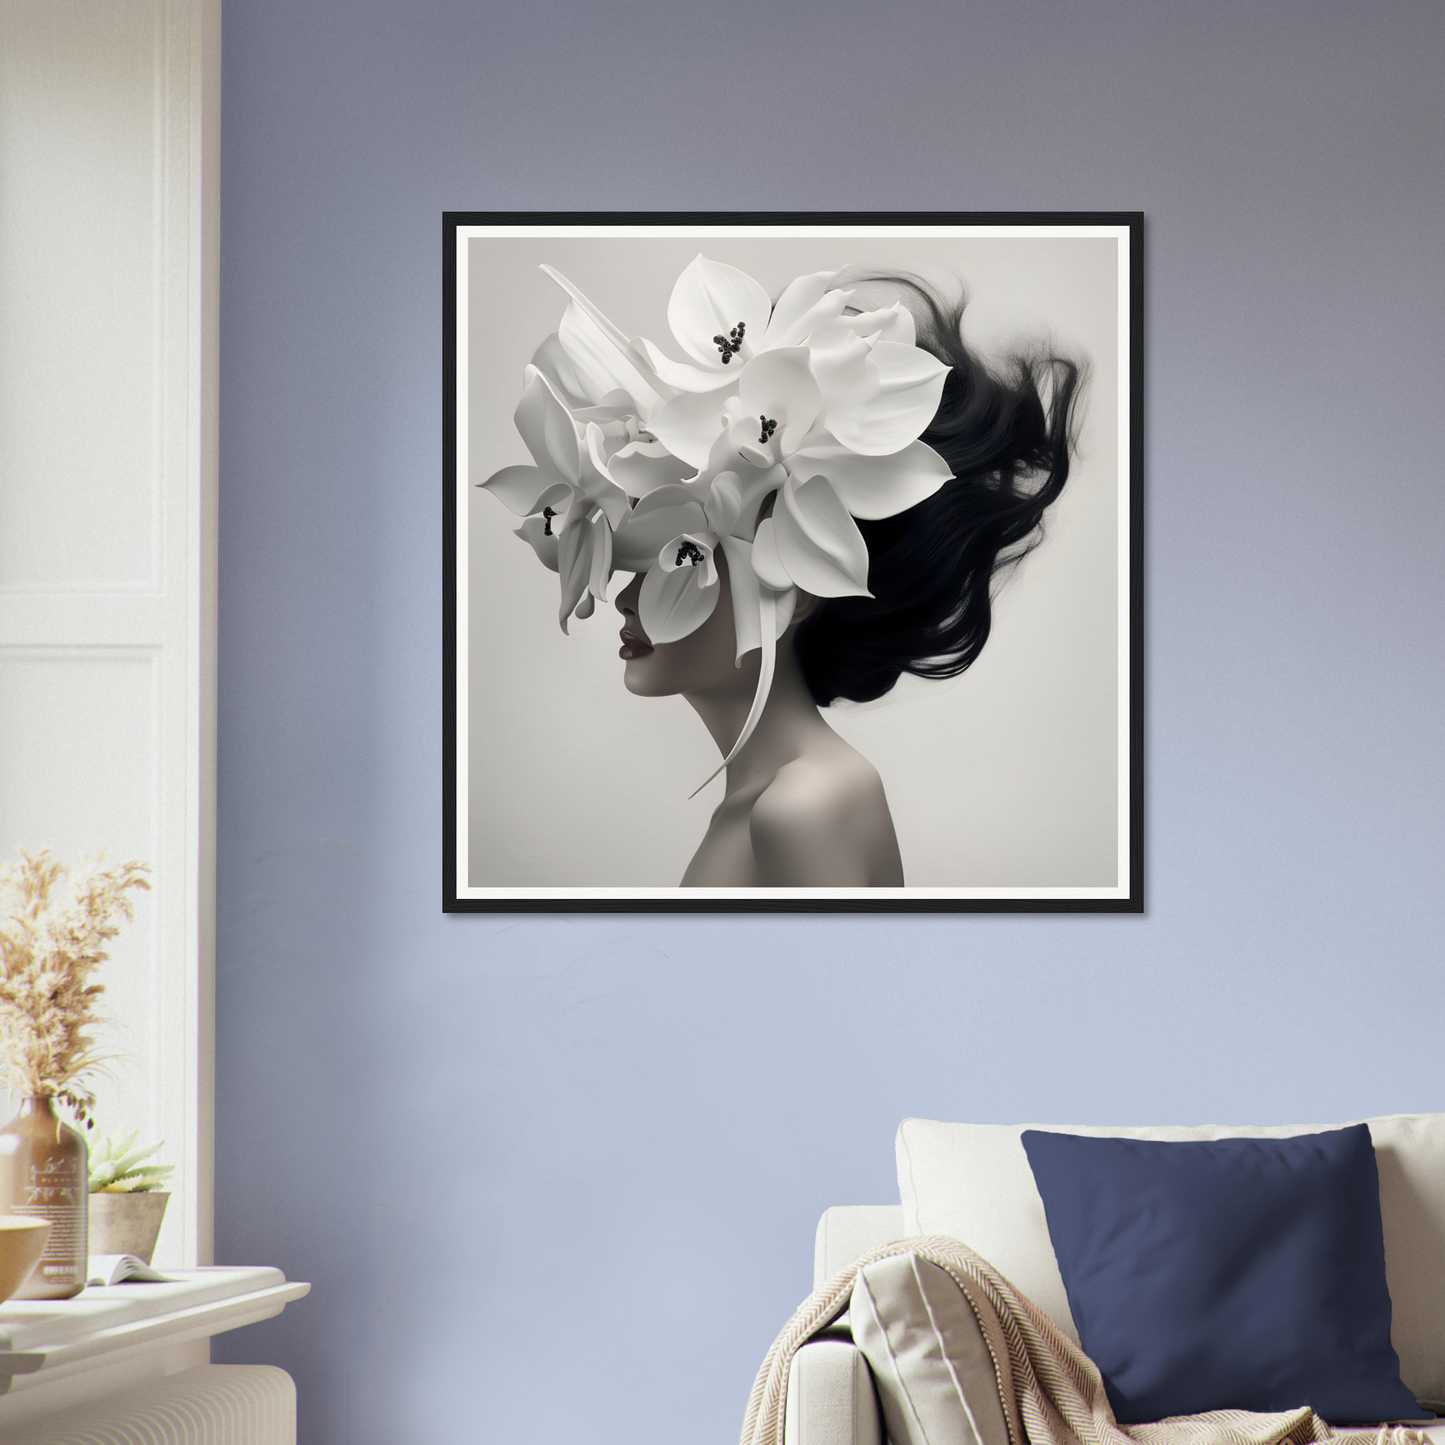 A high quality White Orchid Flower Head The Oracle Windows™ Collection poster of a woman with flowers in her hair, perfect for my wall.